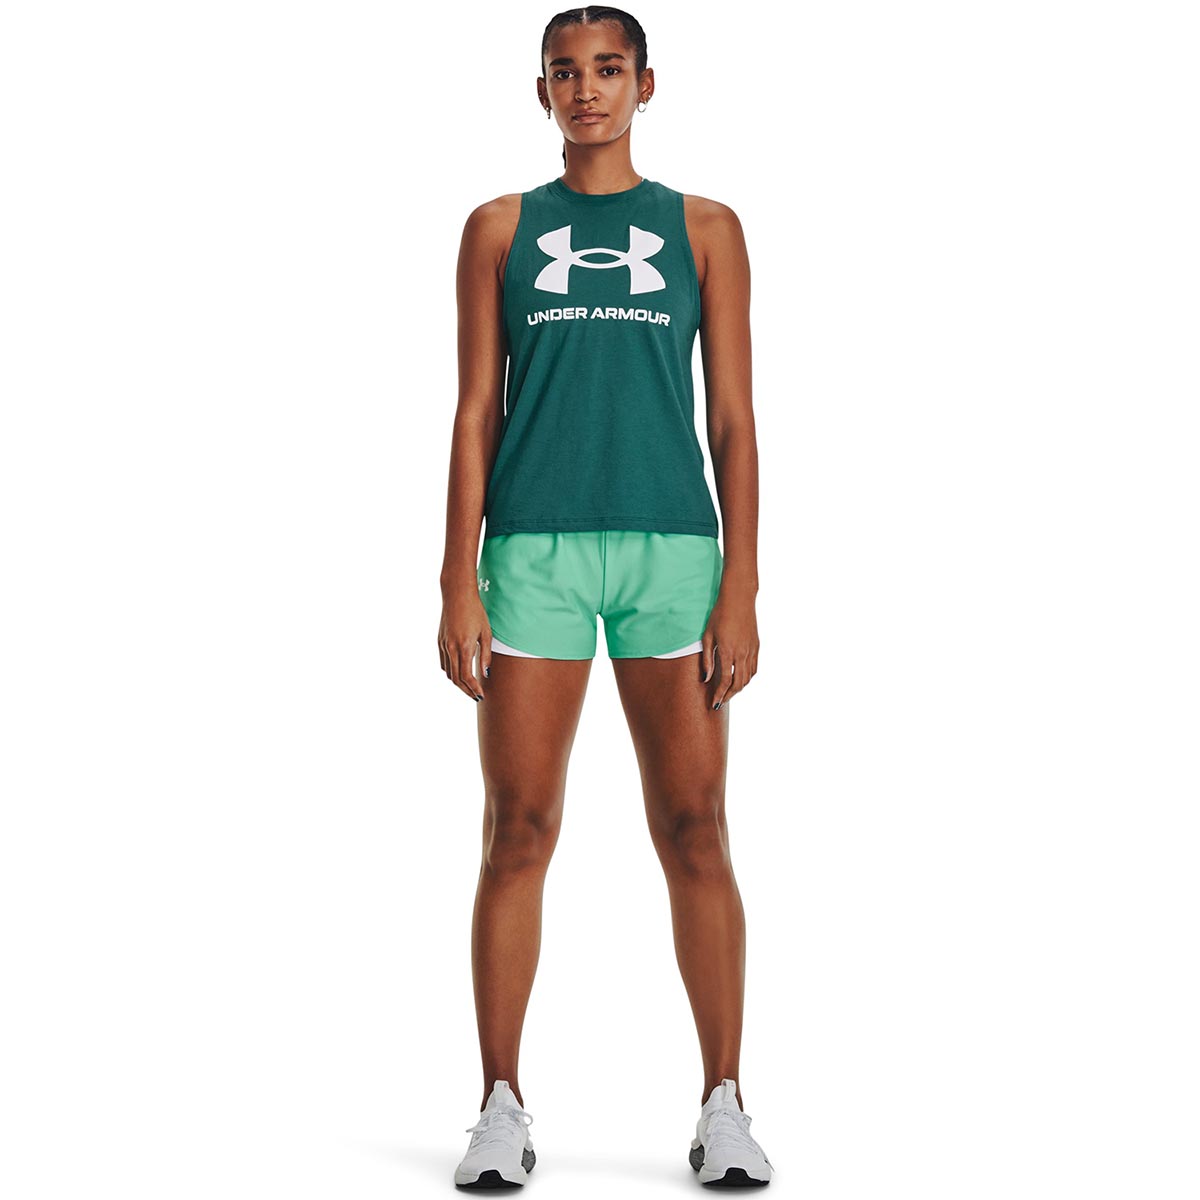 UNDER ARMOUR - SPORTSTYLE GRAPHIC TANK